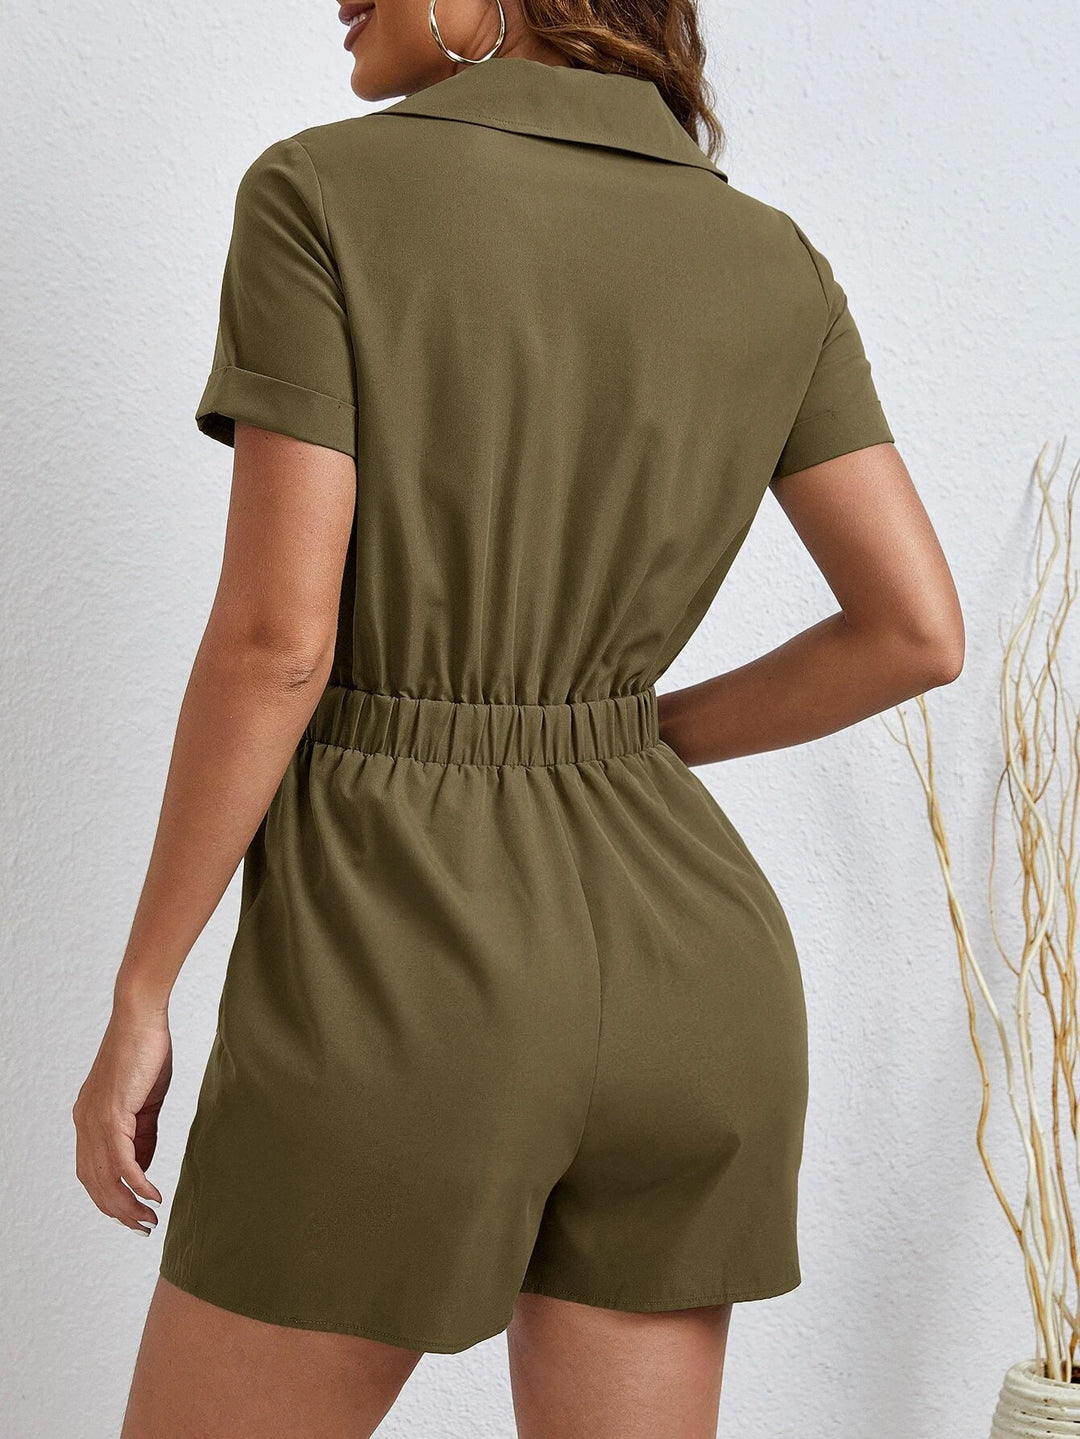 Patched Pocket Roll Up Sleeve Shirt Romper